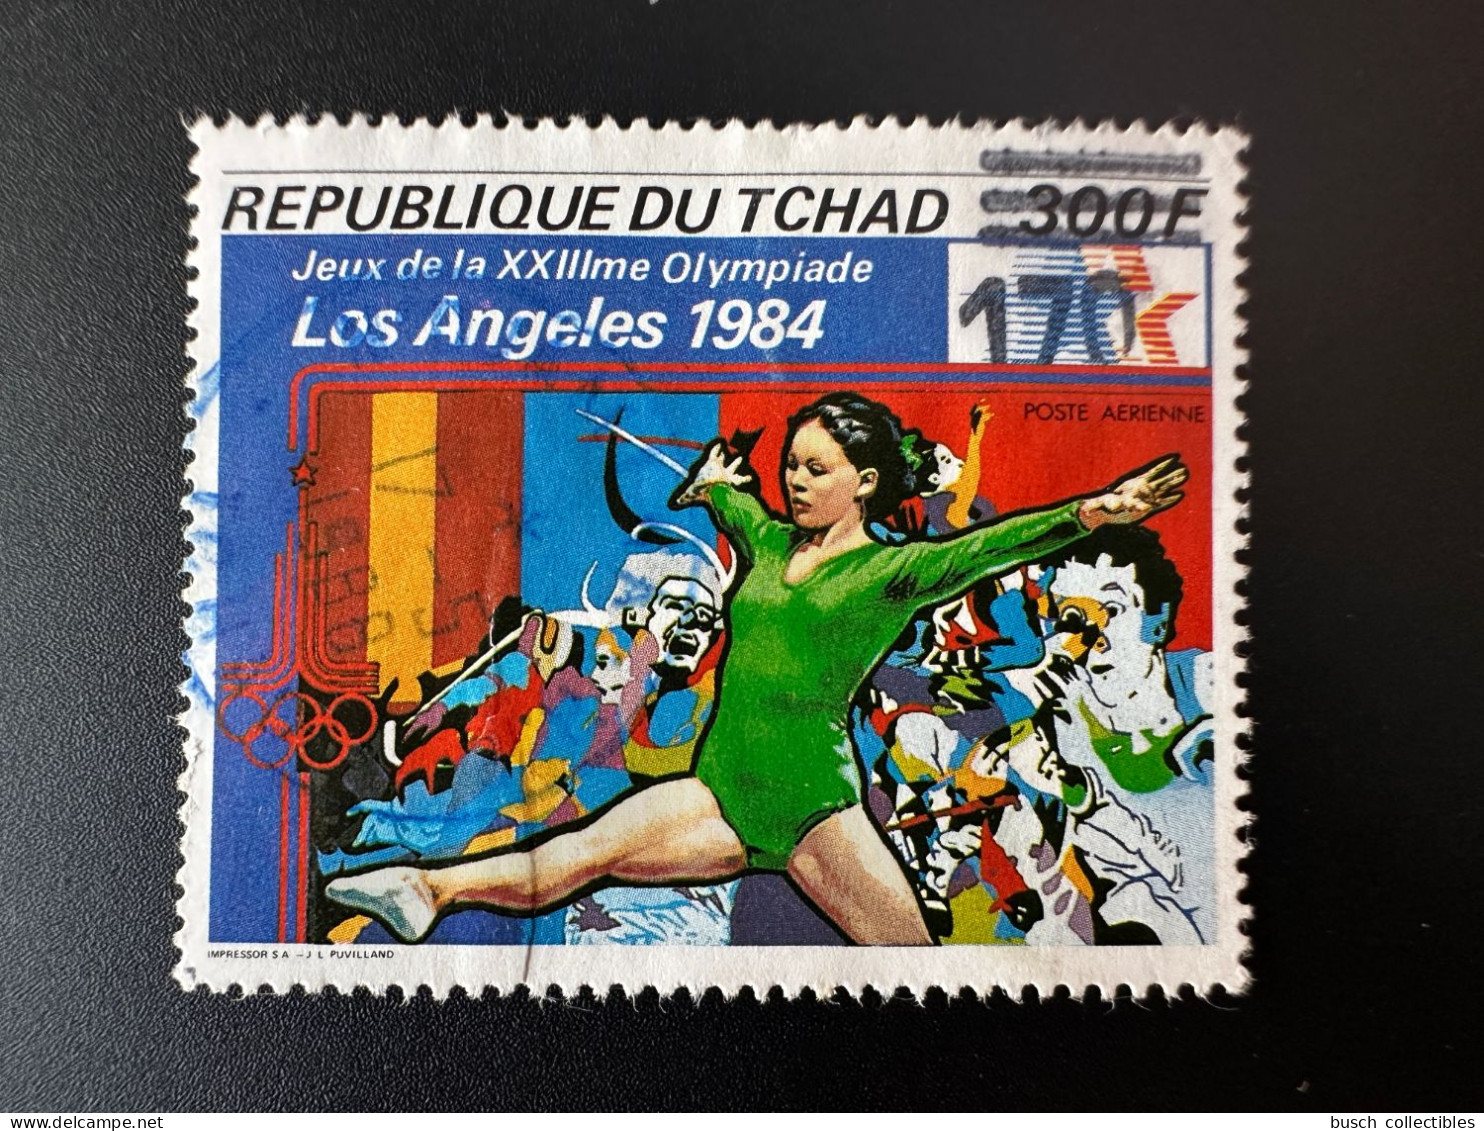 Tchad Chad Tschad 1987 / 1988 Mi. 1149 Oblitéré Used Surchargé Overprint Olympic Games Jeux Olympiques Los Angeles 1984 - Chad (1960-...)